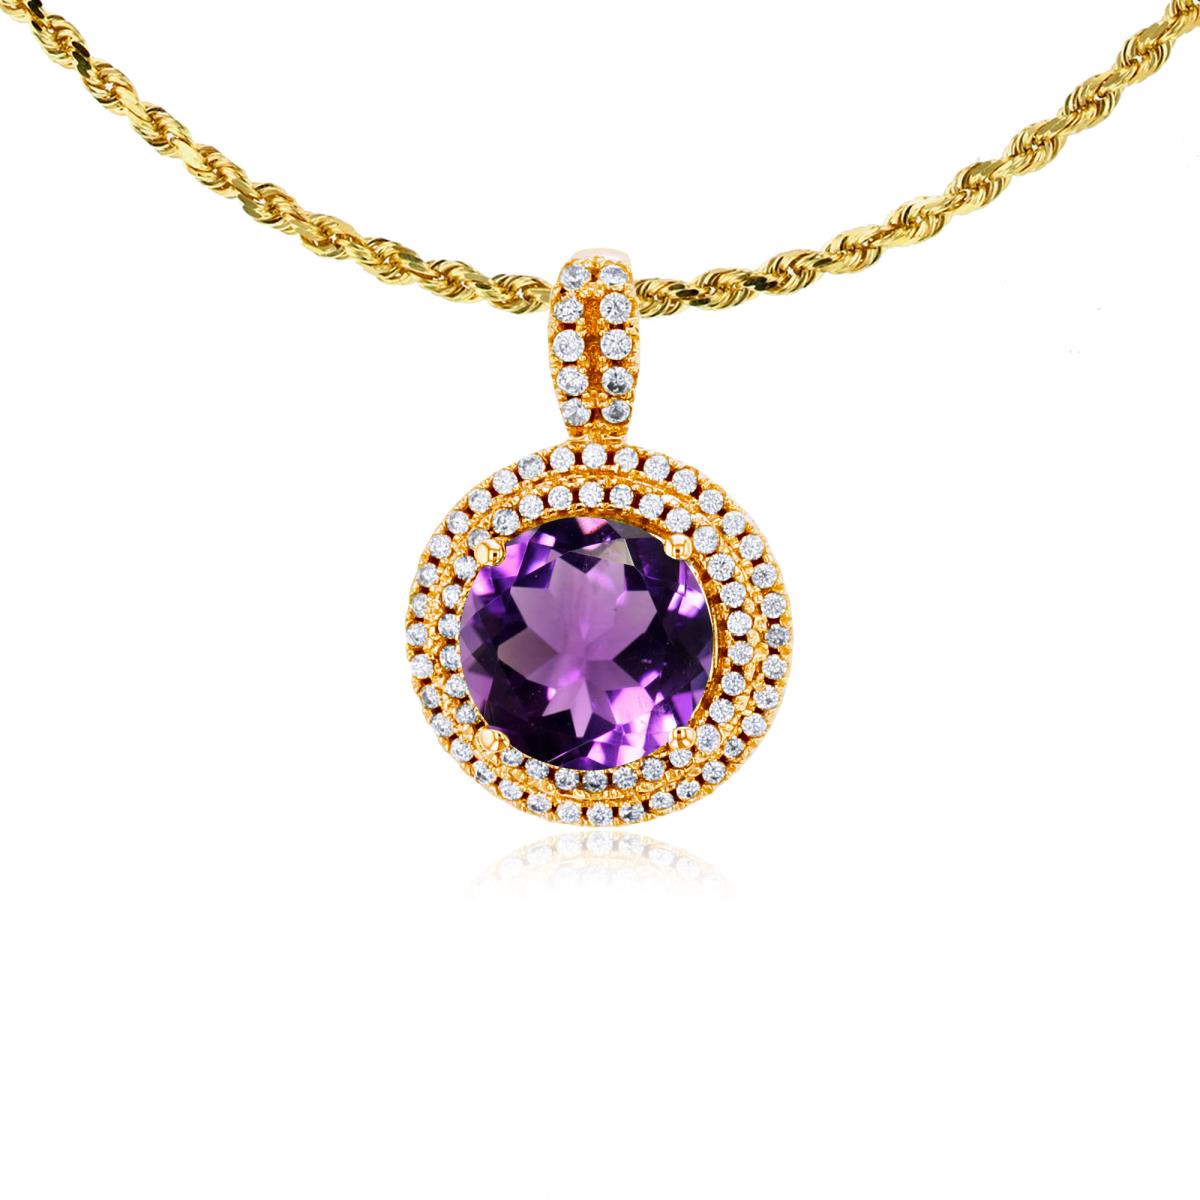 10K Yellow Gold 7mm Round Amethyst & 0.25 CTTW Diamonds Double Halo 18" Rope Chain Necklace